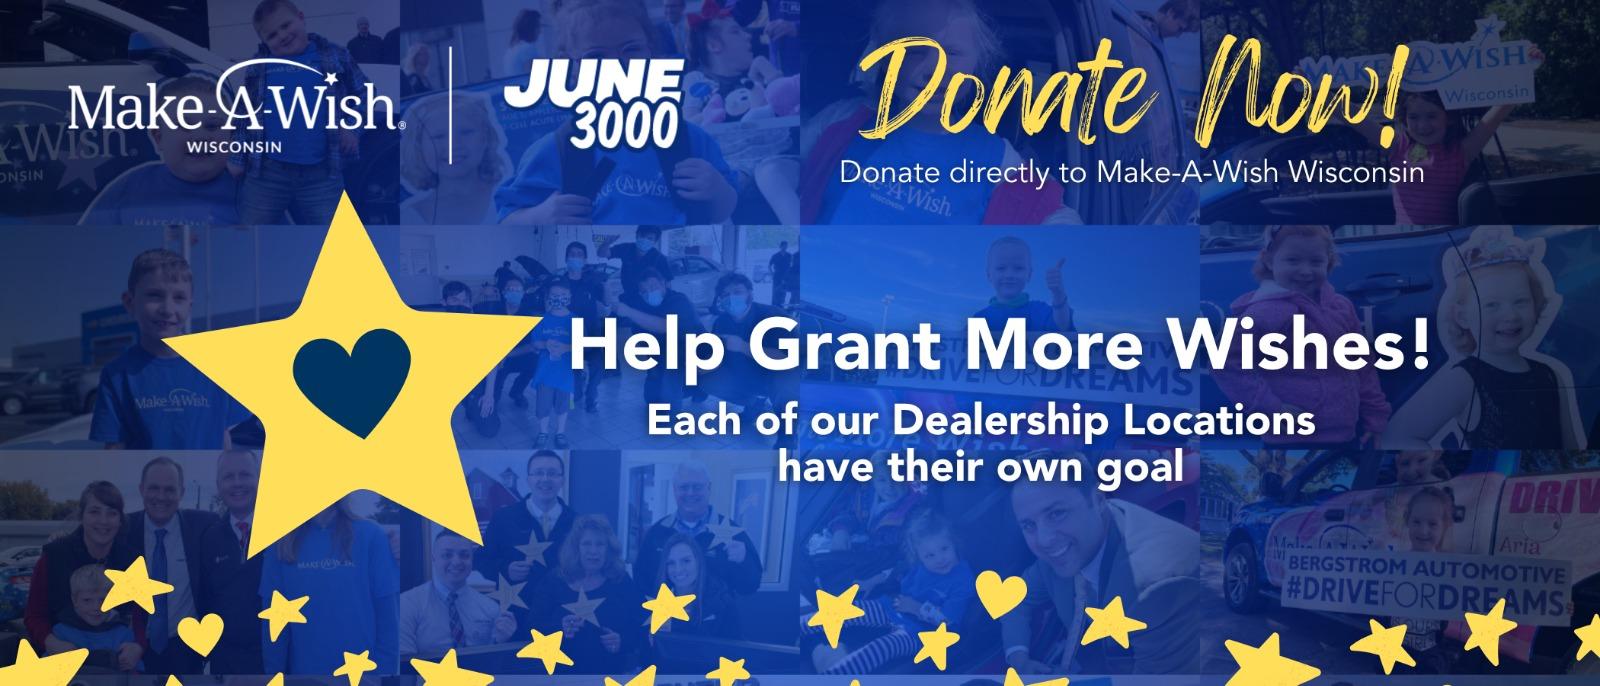 Help Grant More Wishes Each of our Dealership Locations have their own goal